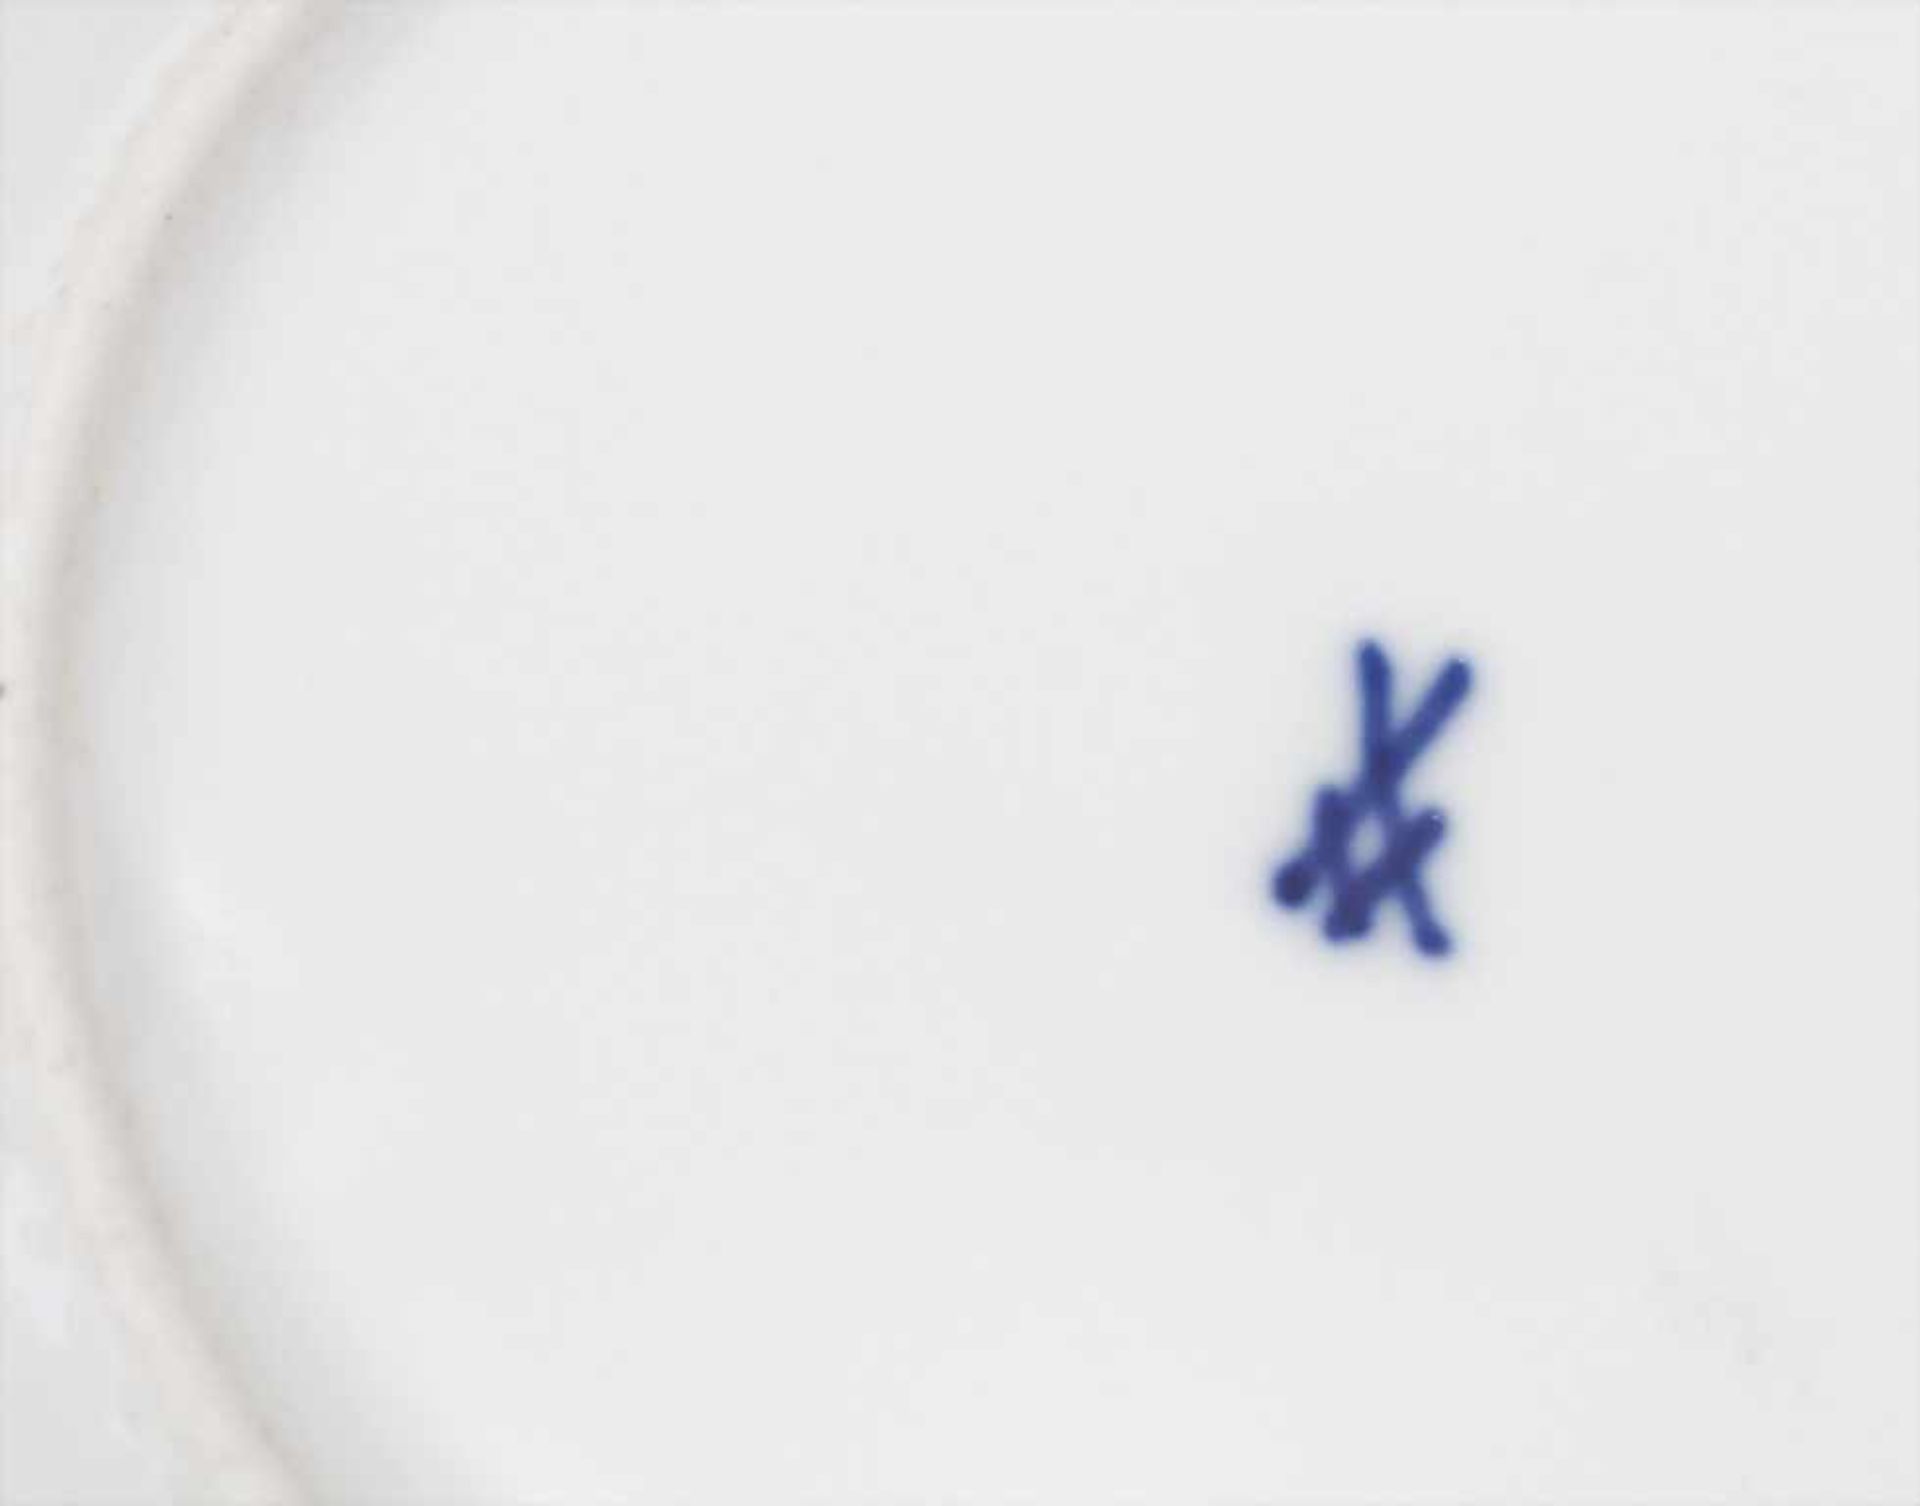 Tasse und UT mit Monogramm / A cup with saucer with monogram, Meissen, Anfang 19. Jh. - Image 3 of 3